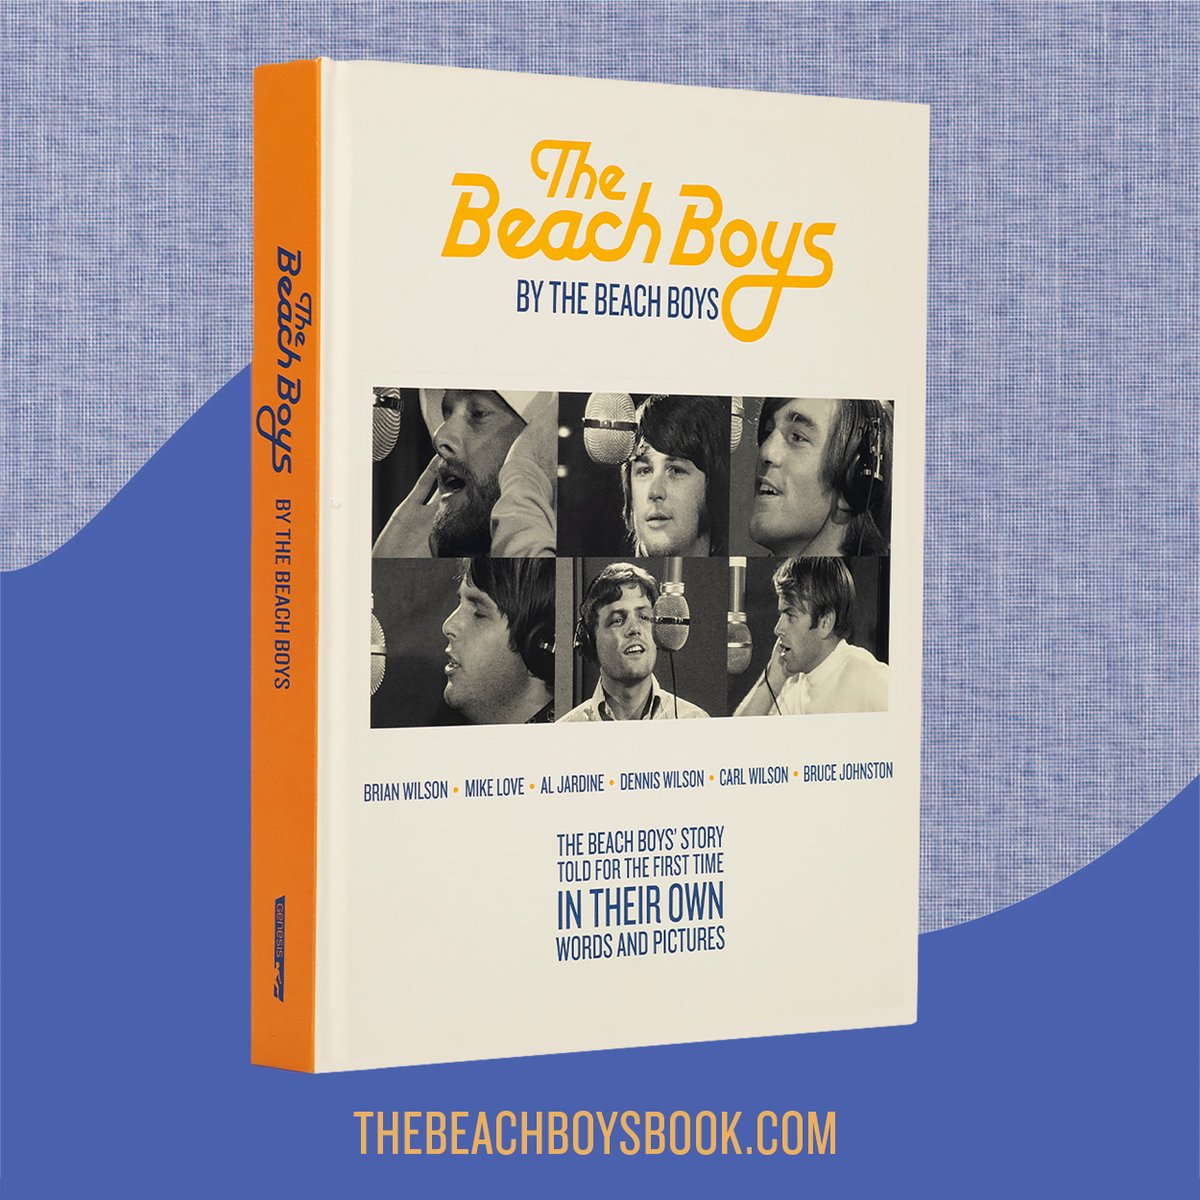 🏄‍♂️ Dive into the soundwaves with @TheBeachBoys! More than just a band, they're the embodiment of an era that still resonates today. Surf's up on this timeless cultural journey! 🌊 ramzine.co.uk/reviews/the-be… | RAMzine #GoodVibrations #60sMusic